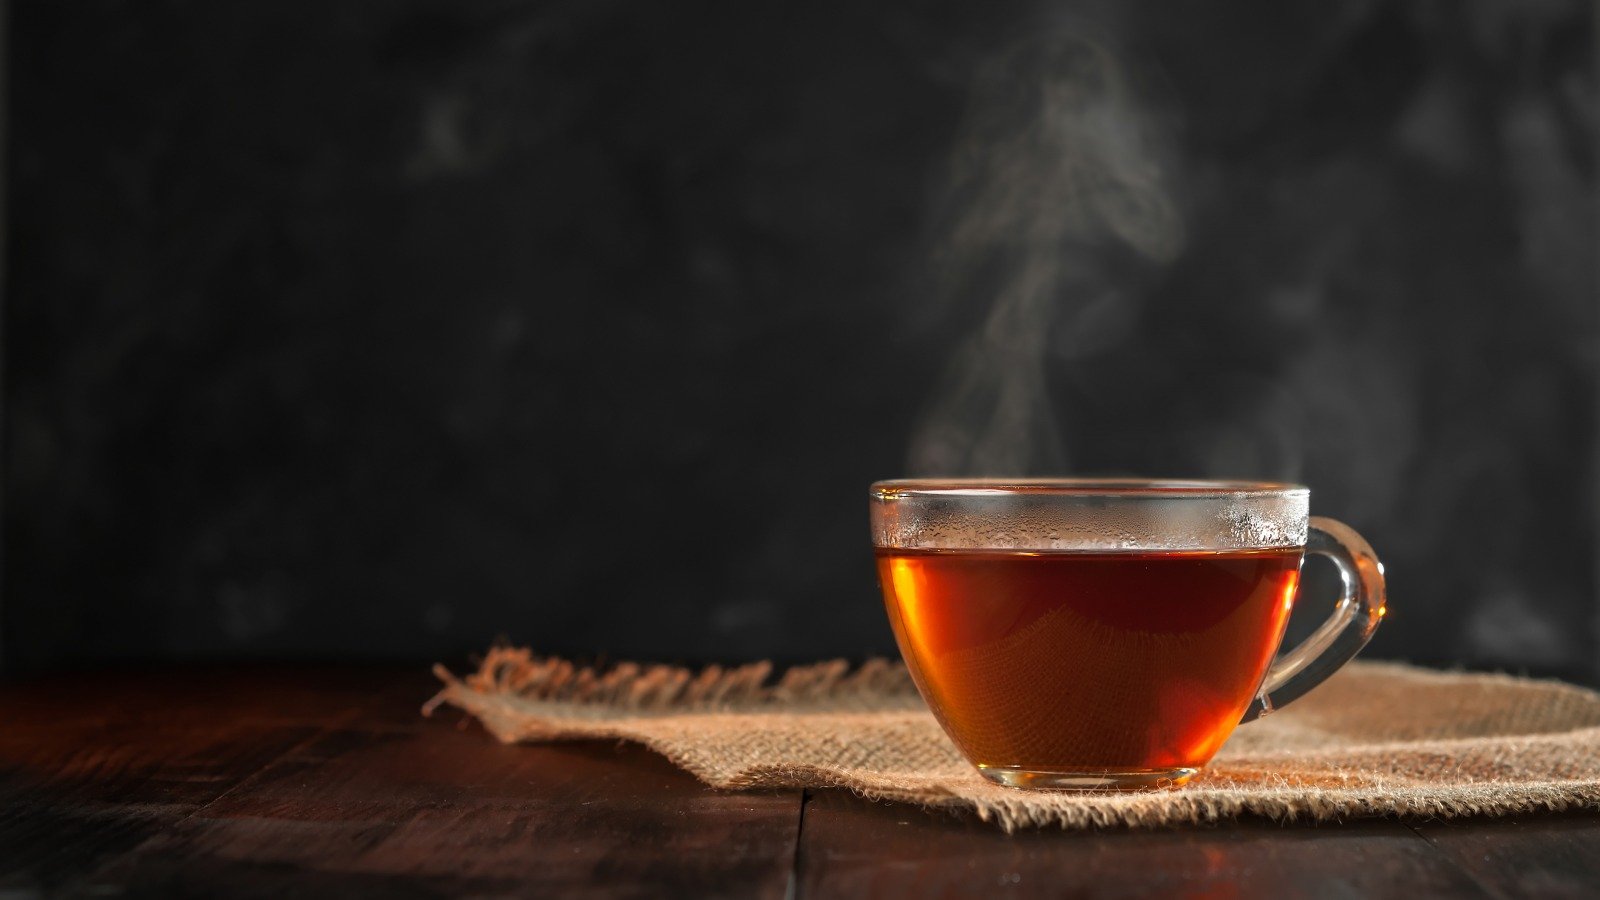 The Healthiest Way To Make Tea Isn't What You Think